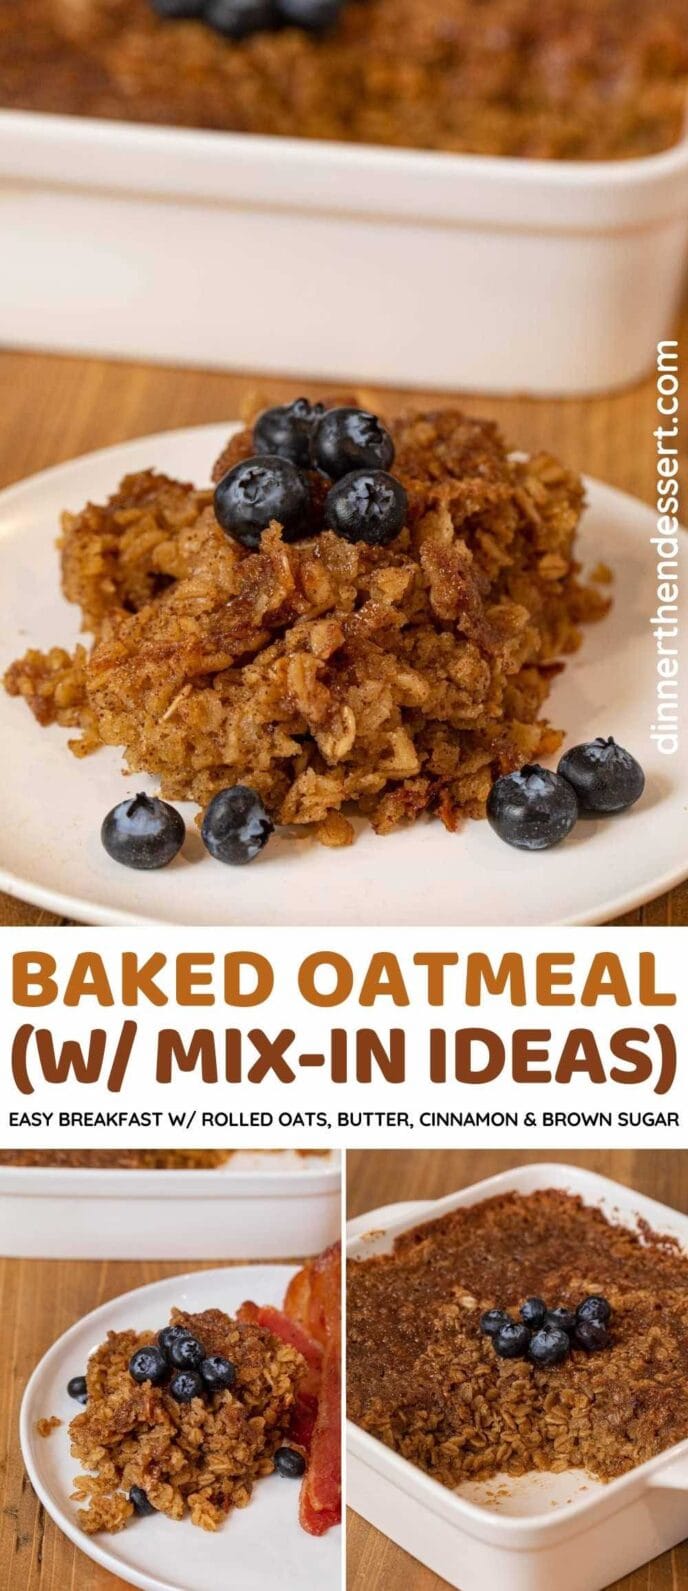 Baked Oatmeal collage